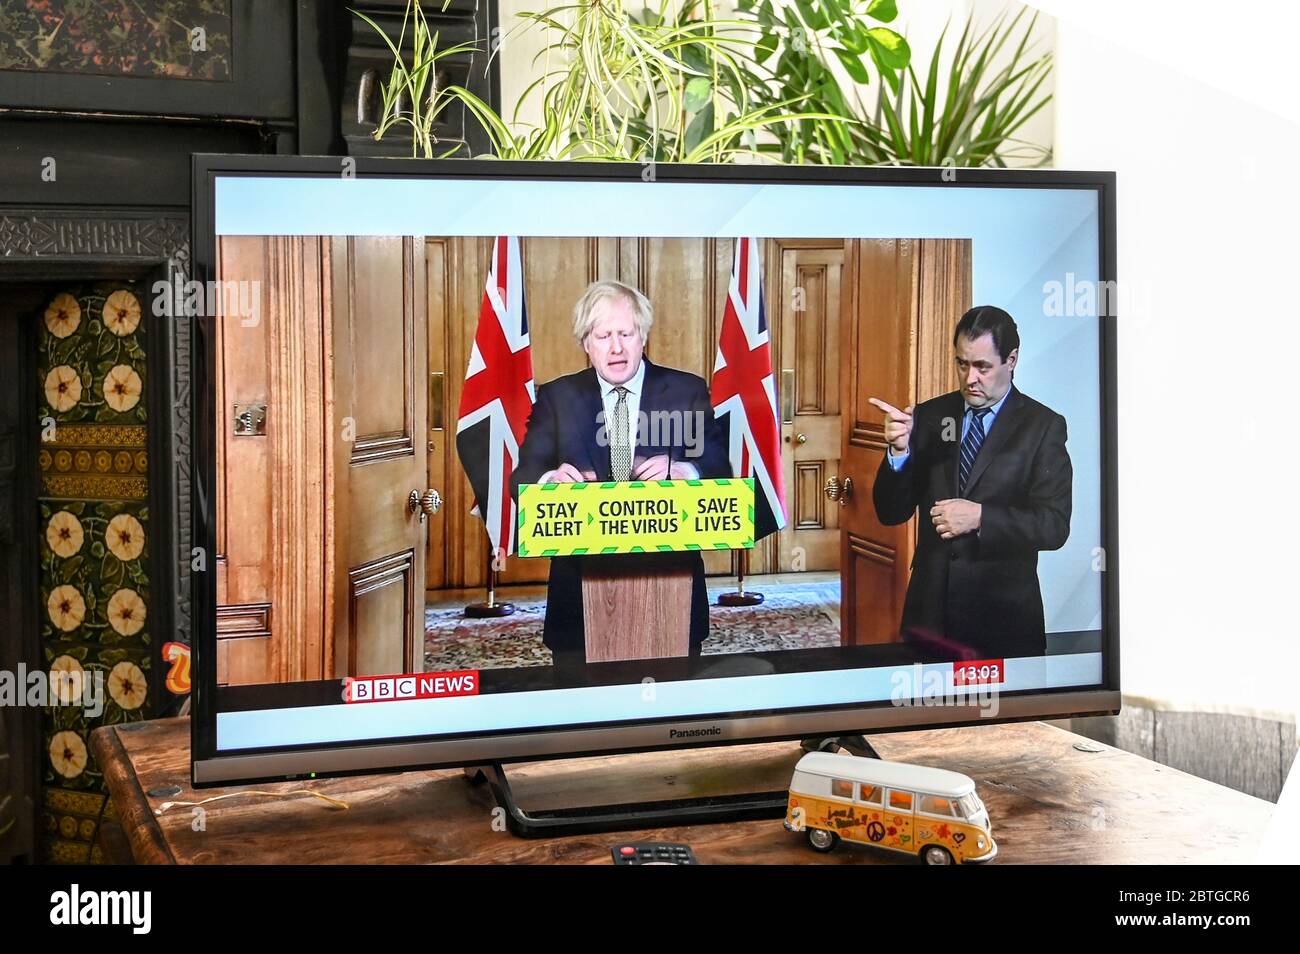 Prime Minister Boris Johnson giving a televised press conference from Downing Street in regard to Covid-19 with "stay alert, save lives" slogan. Stock Photo